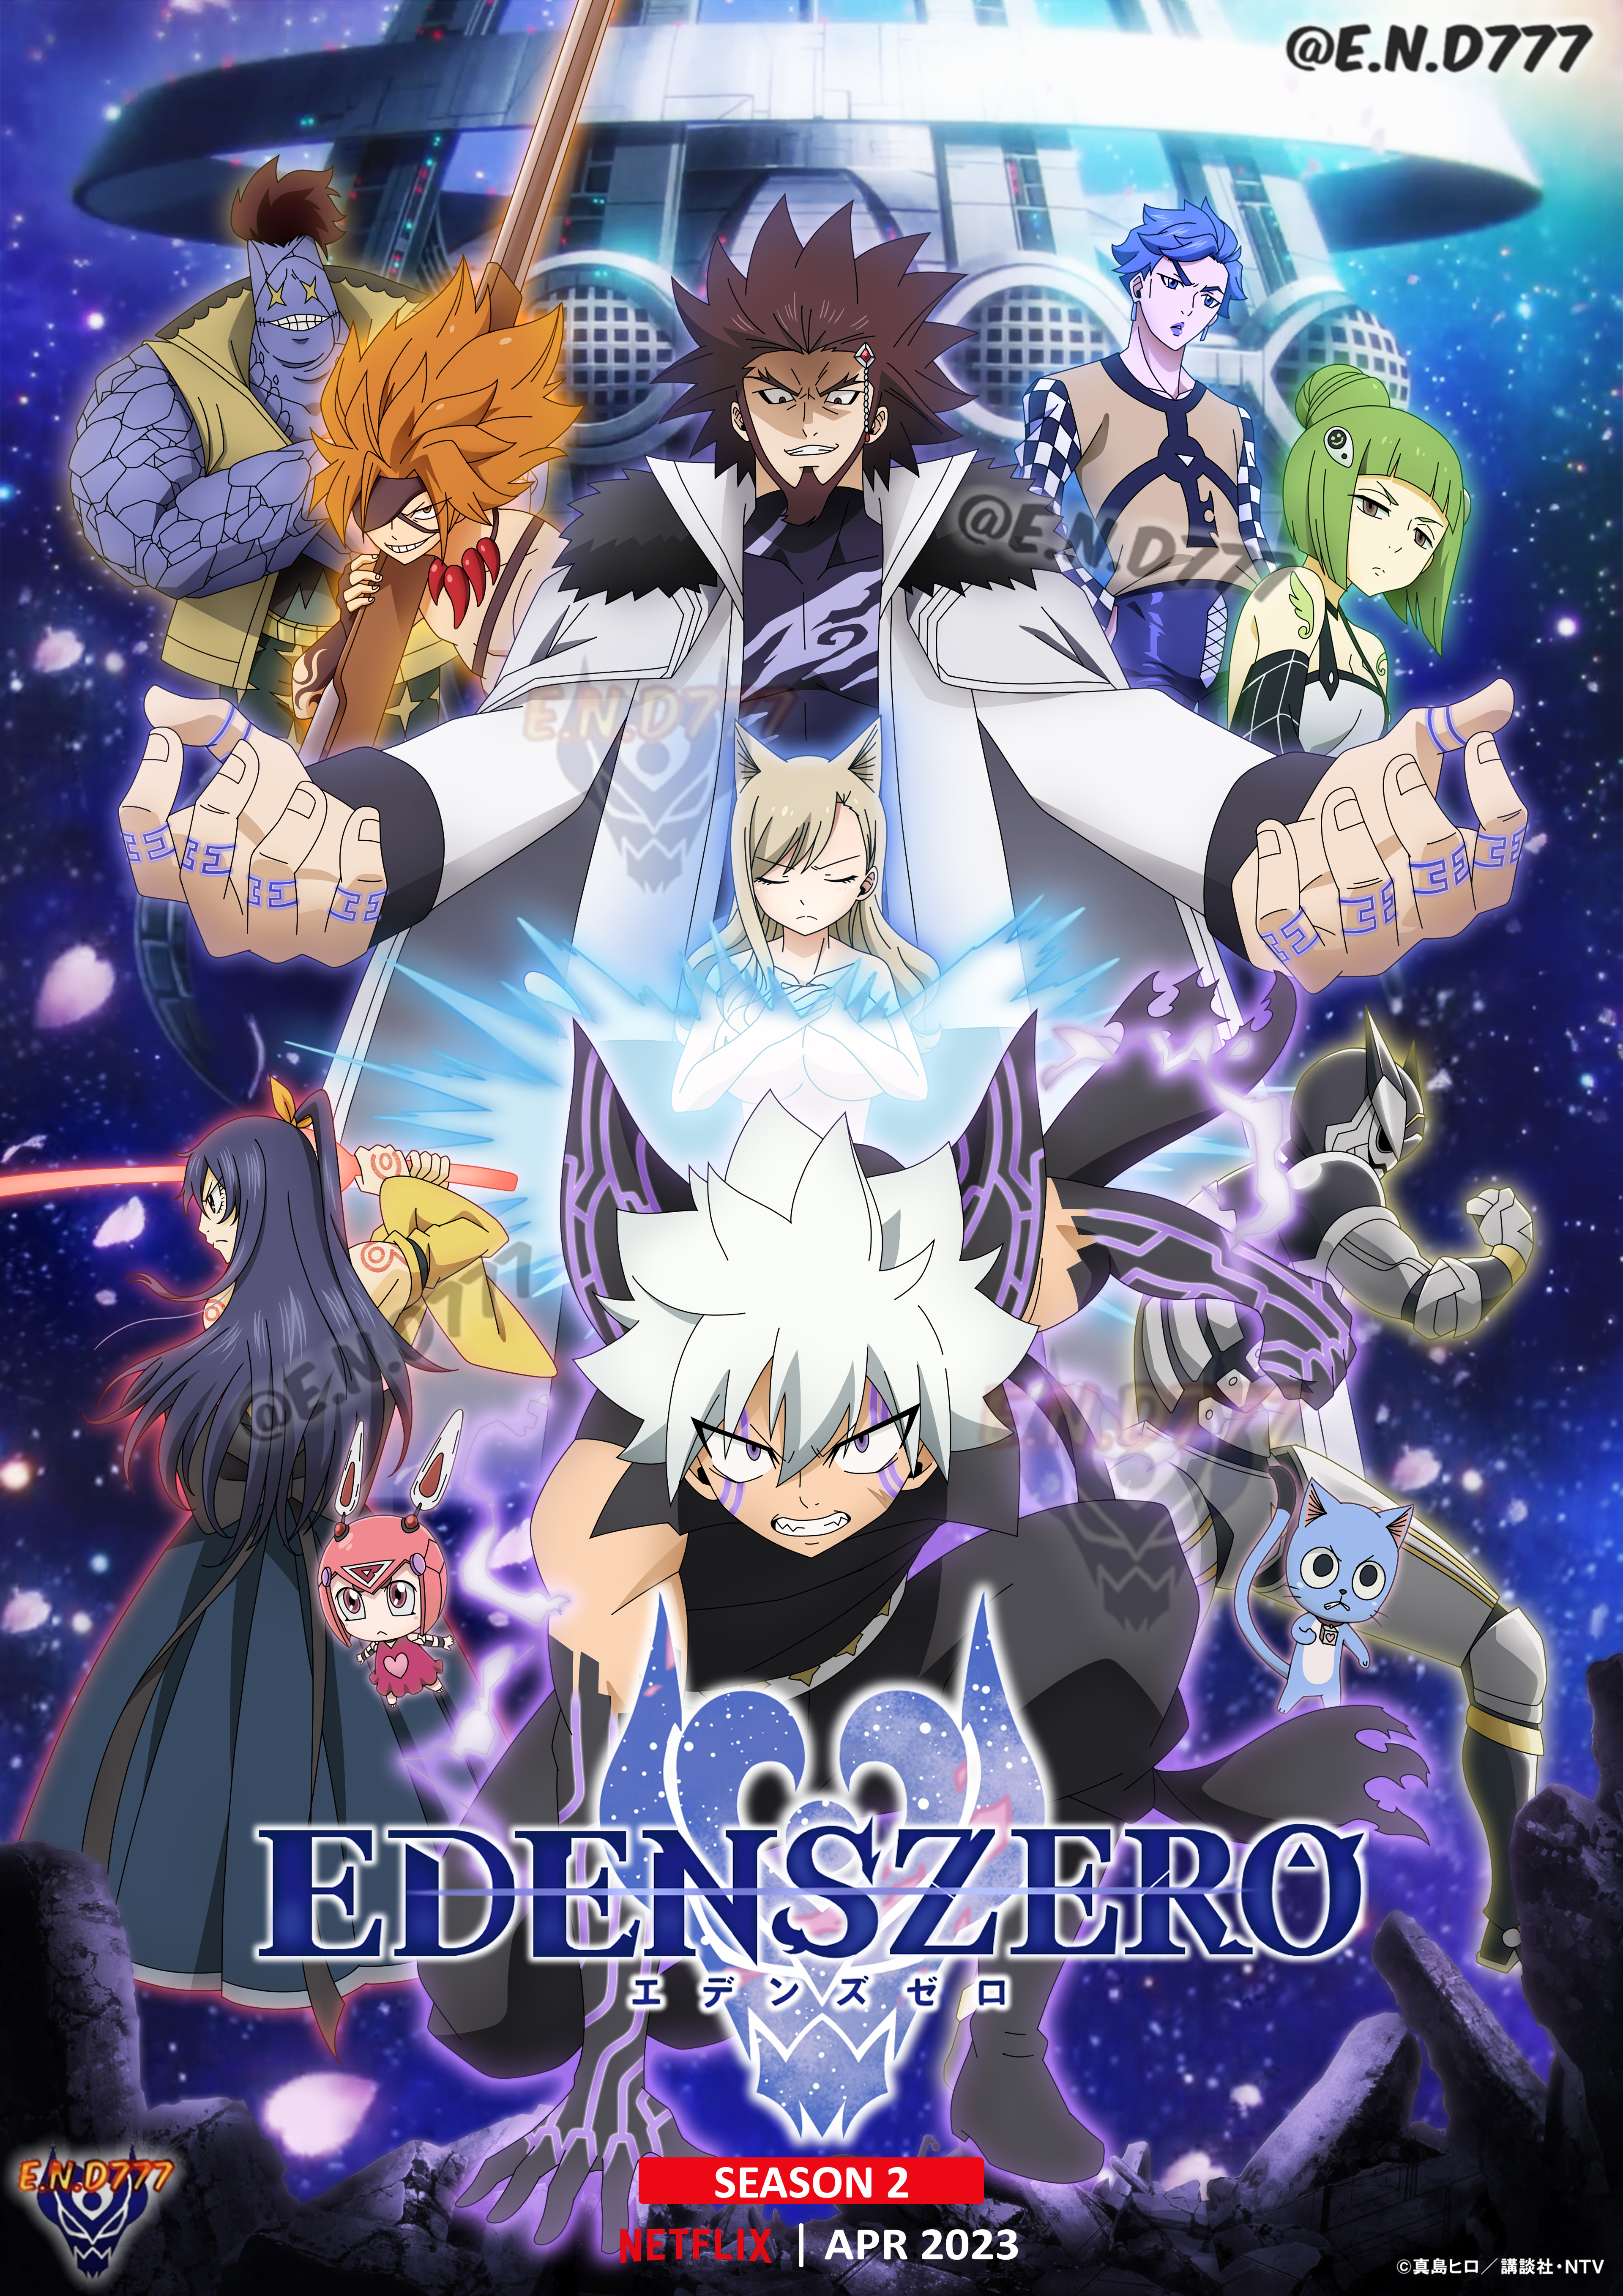 Edens Zero Season 2 Unveils Preview Images and Staff for Episode 20